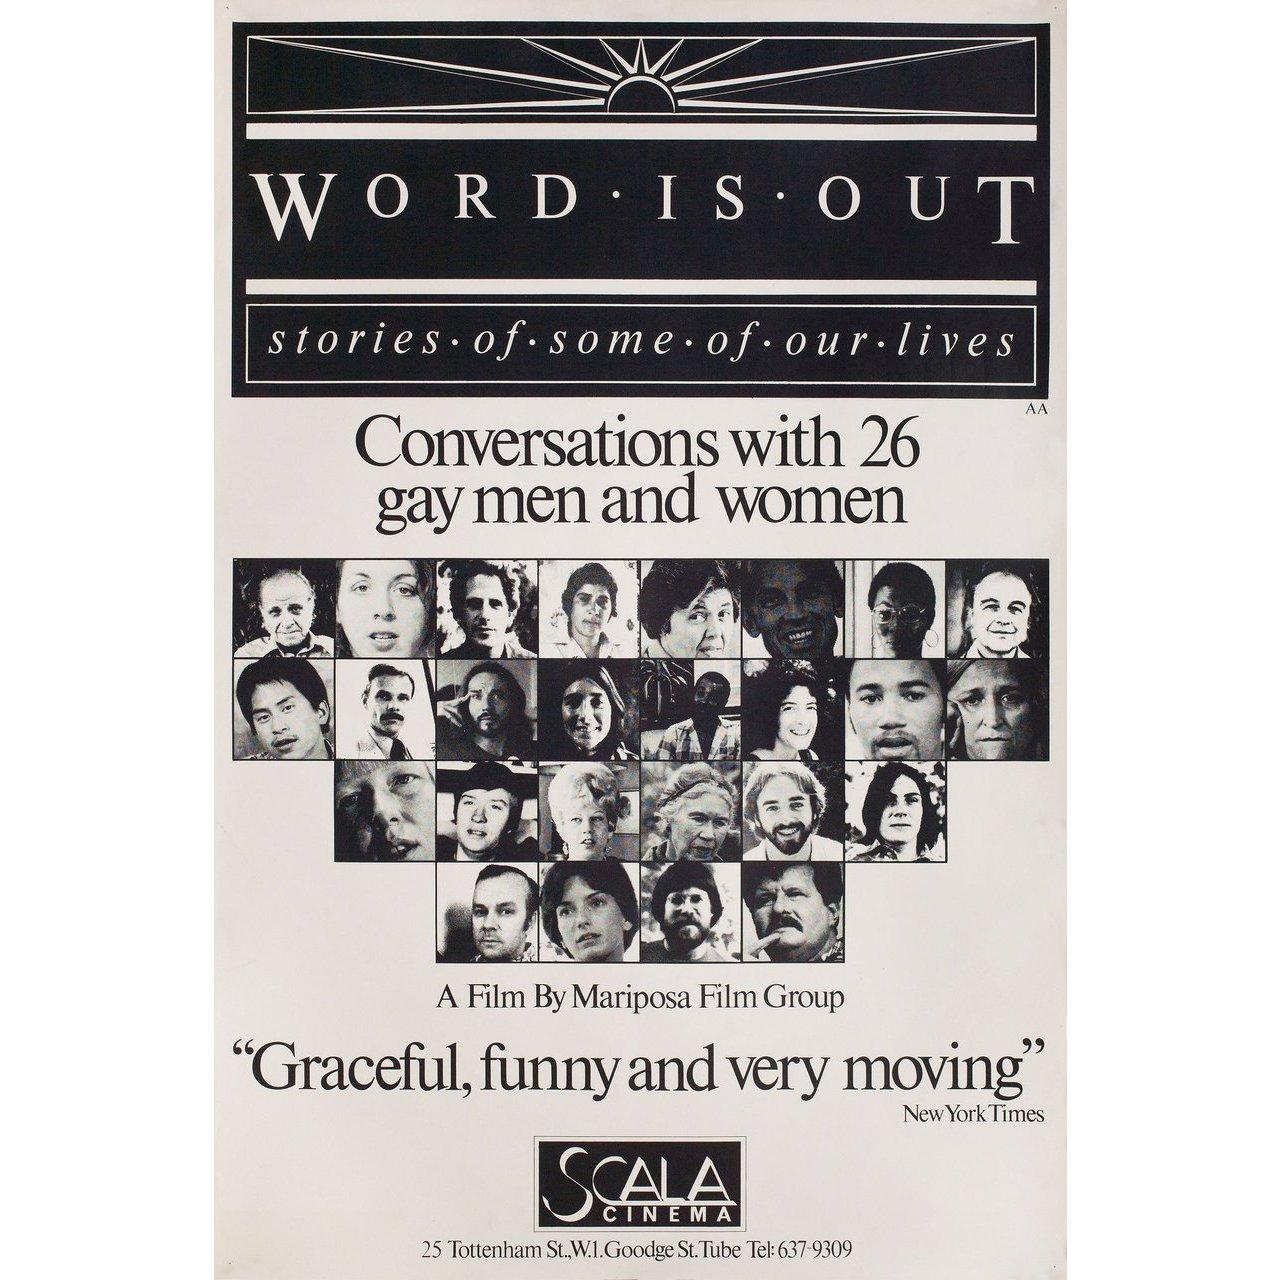 Word Is Out 1977 British Double Crown Filmplakat im Zustand „Gut“ im Angebot in New York, NY